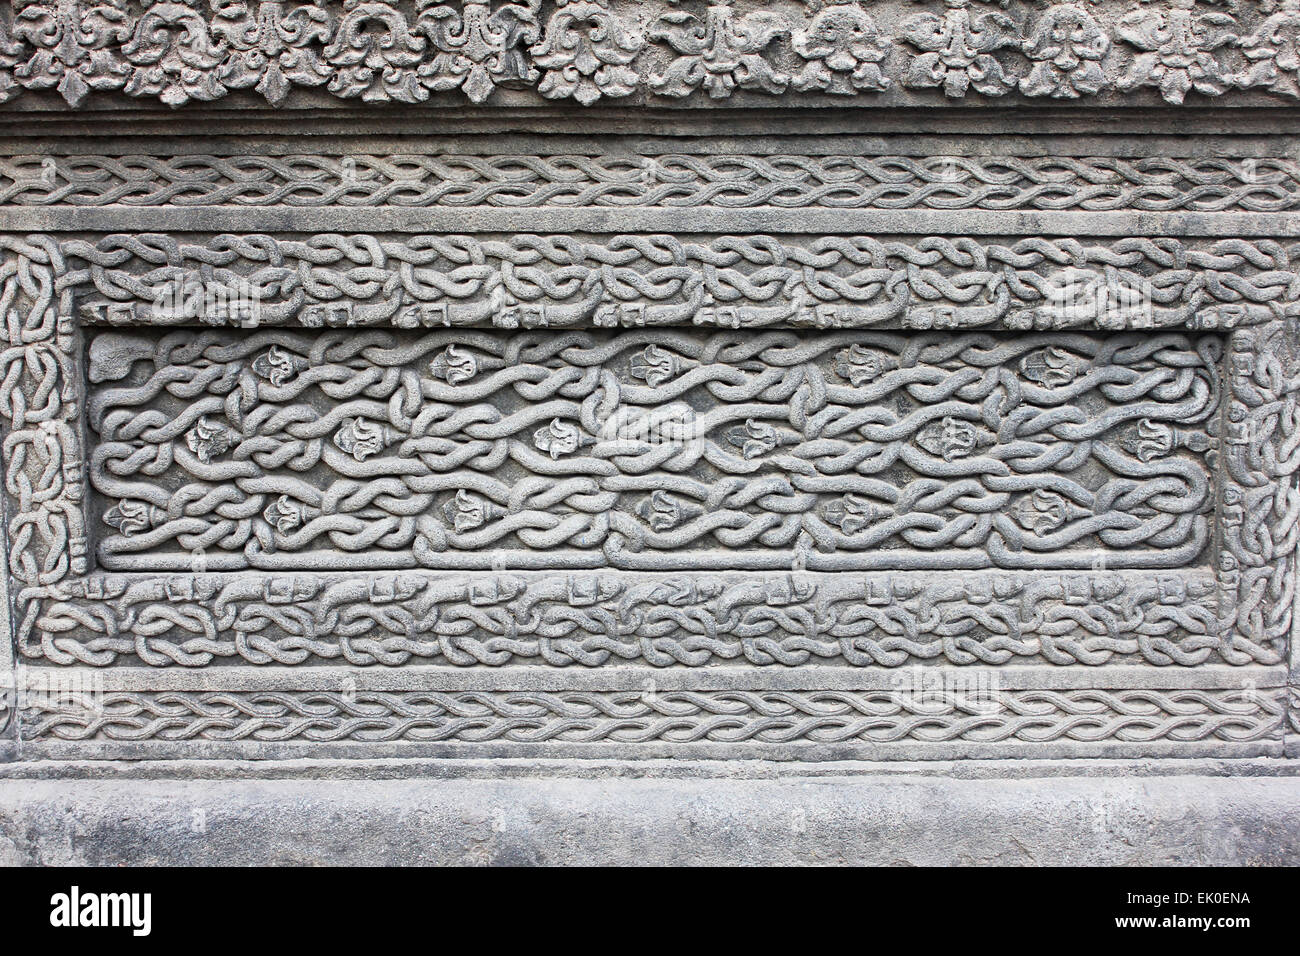 Carved design on the outer walls of Shiva temple in Ahilyabai Holkar fort, Maheswar, Khargone, Madhya Pradesh, India Stock Photo